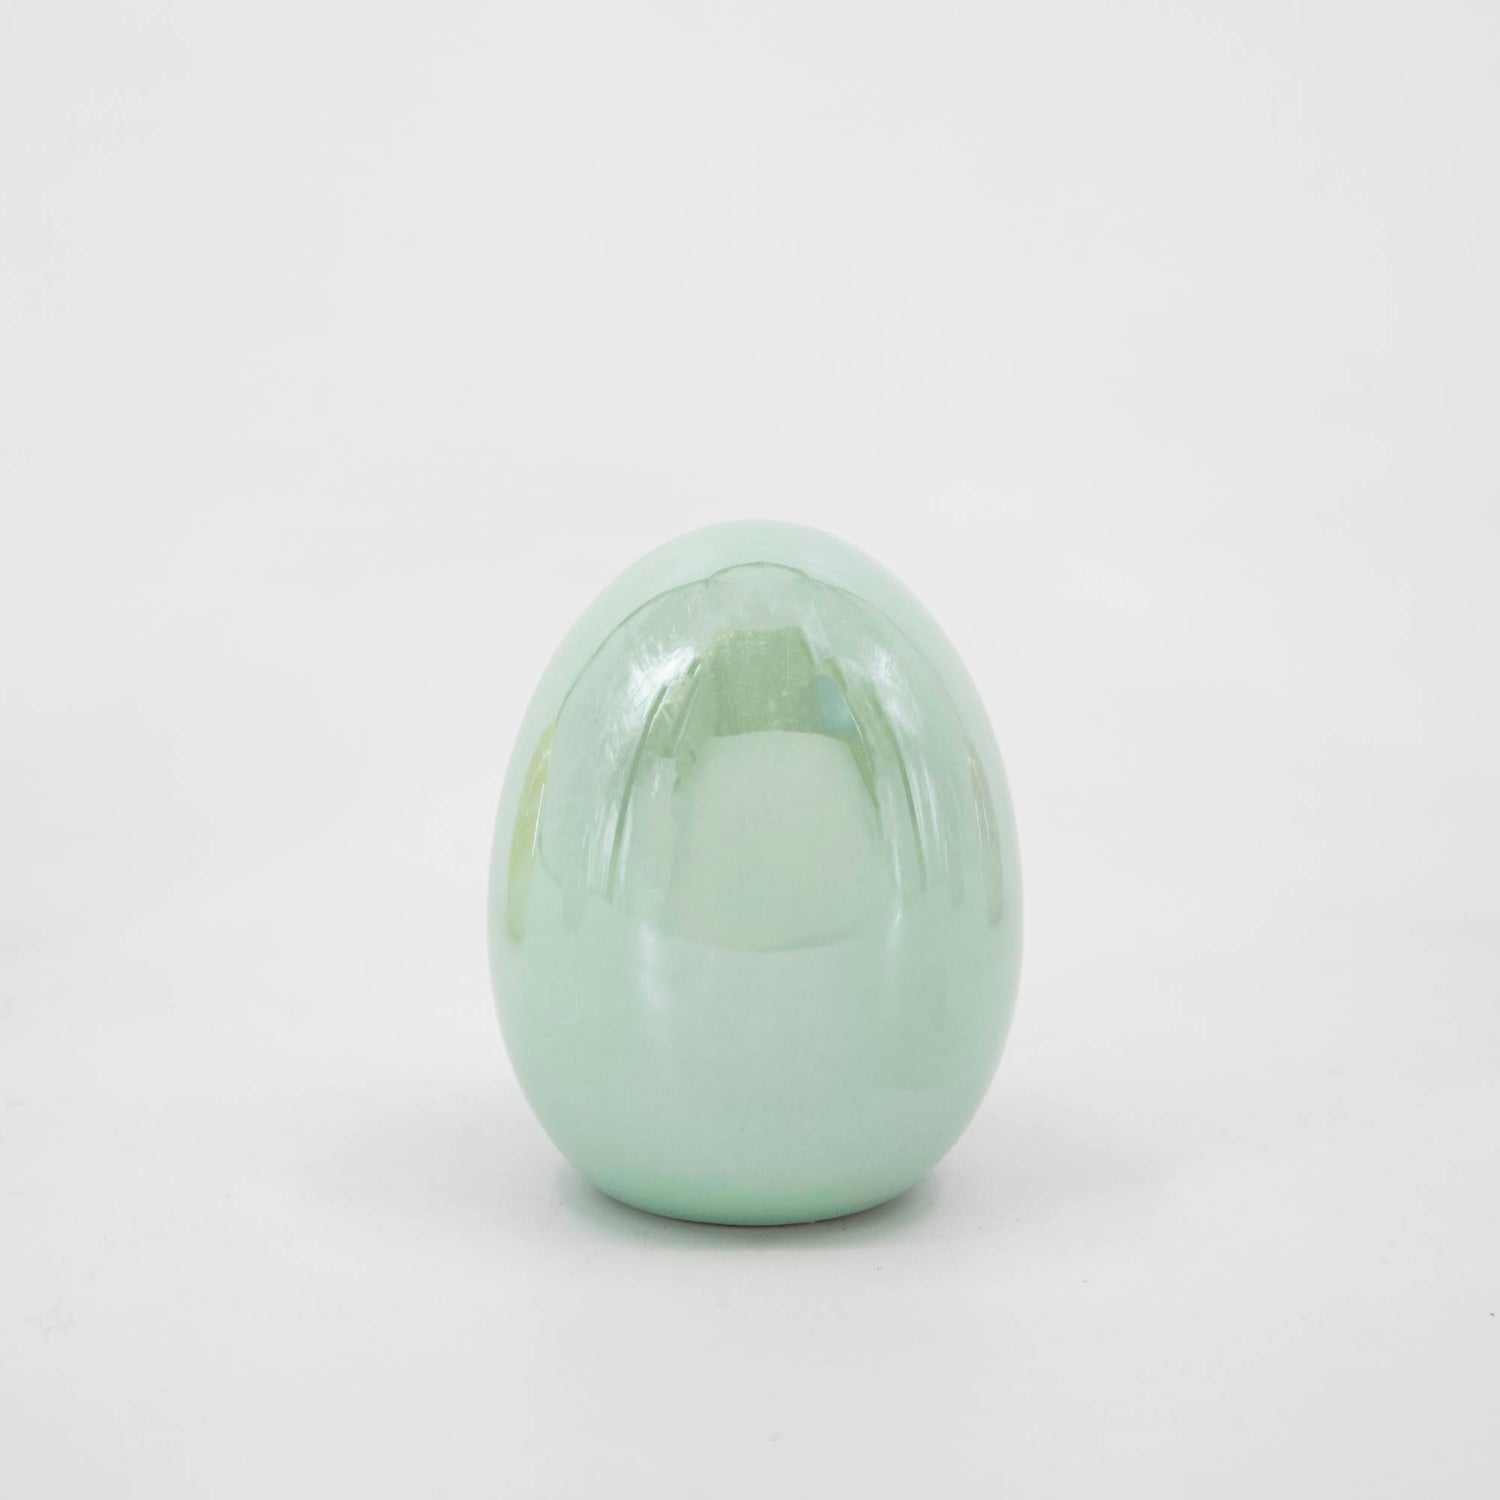 A Small Iridescent Easter egg on a white background from Glitterville.